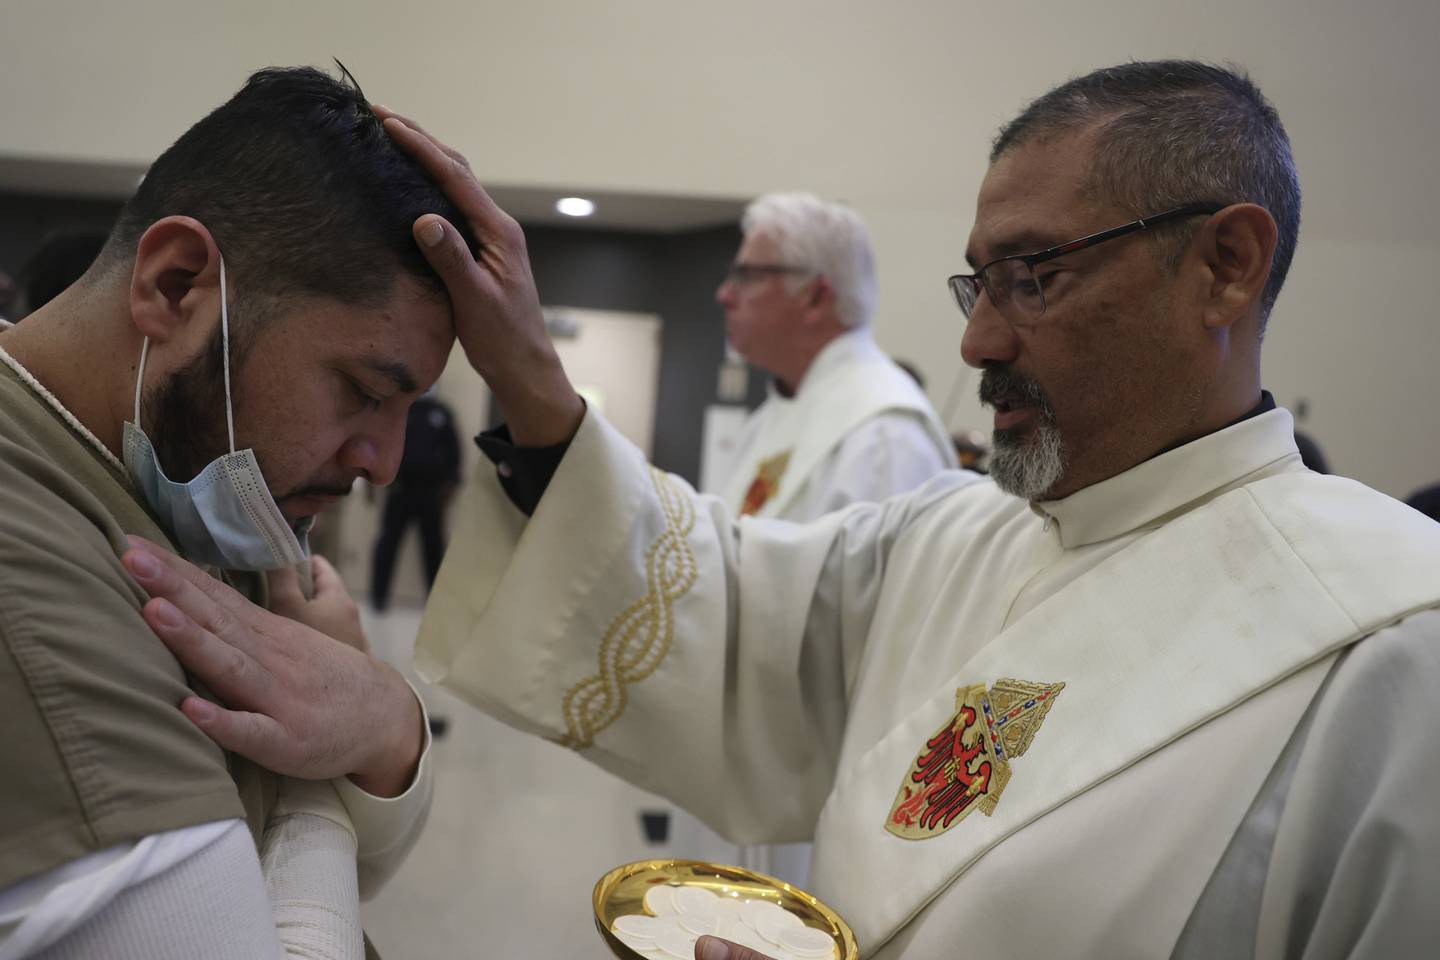 Deacon Pablo Perez gives out communion to an incarcerated individual during morning Christmas Mass at Cook County Jail on Sunday.